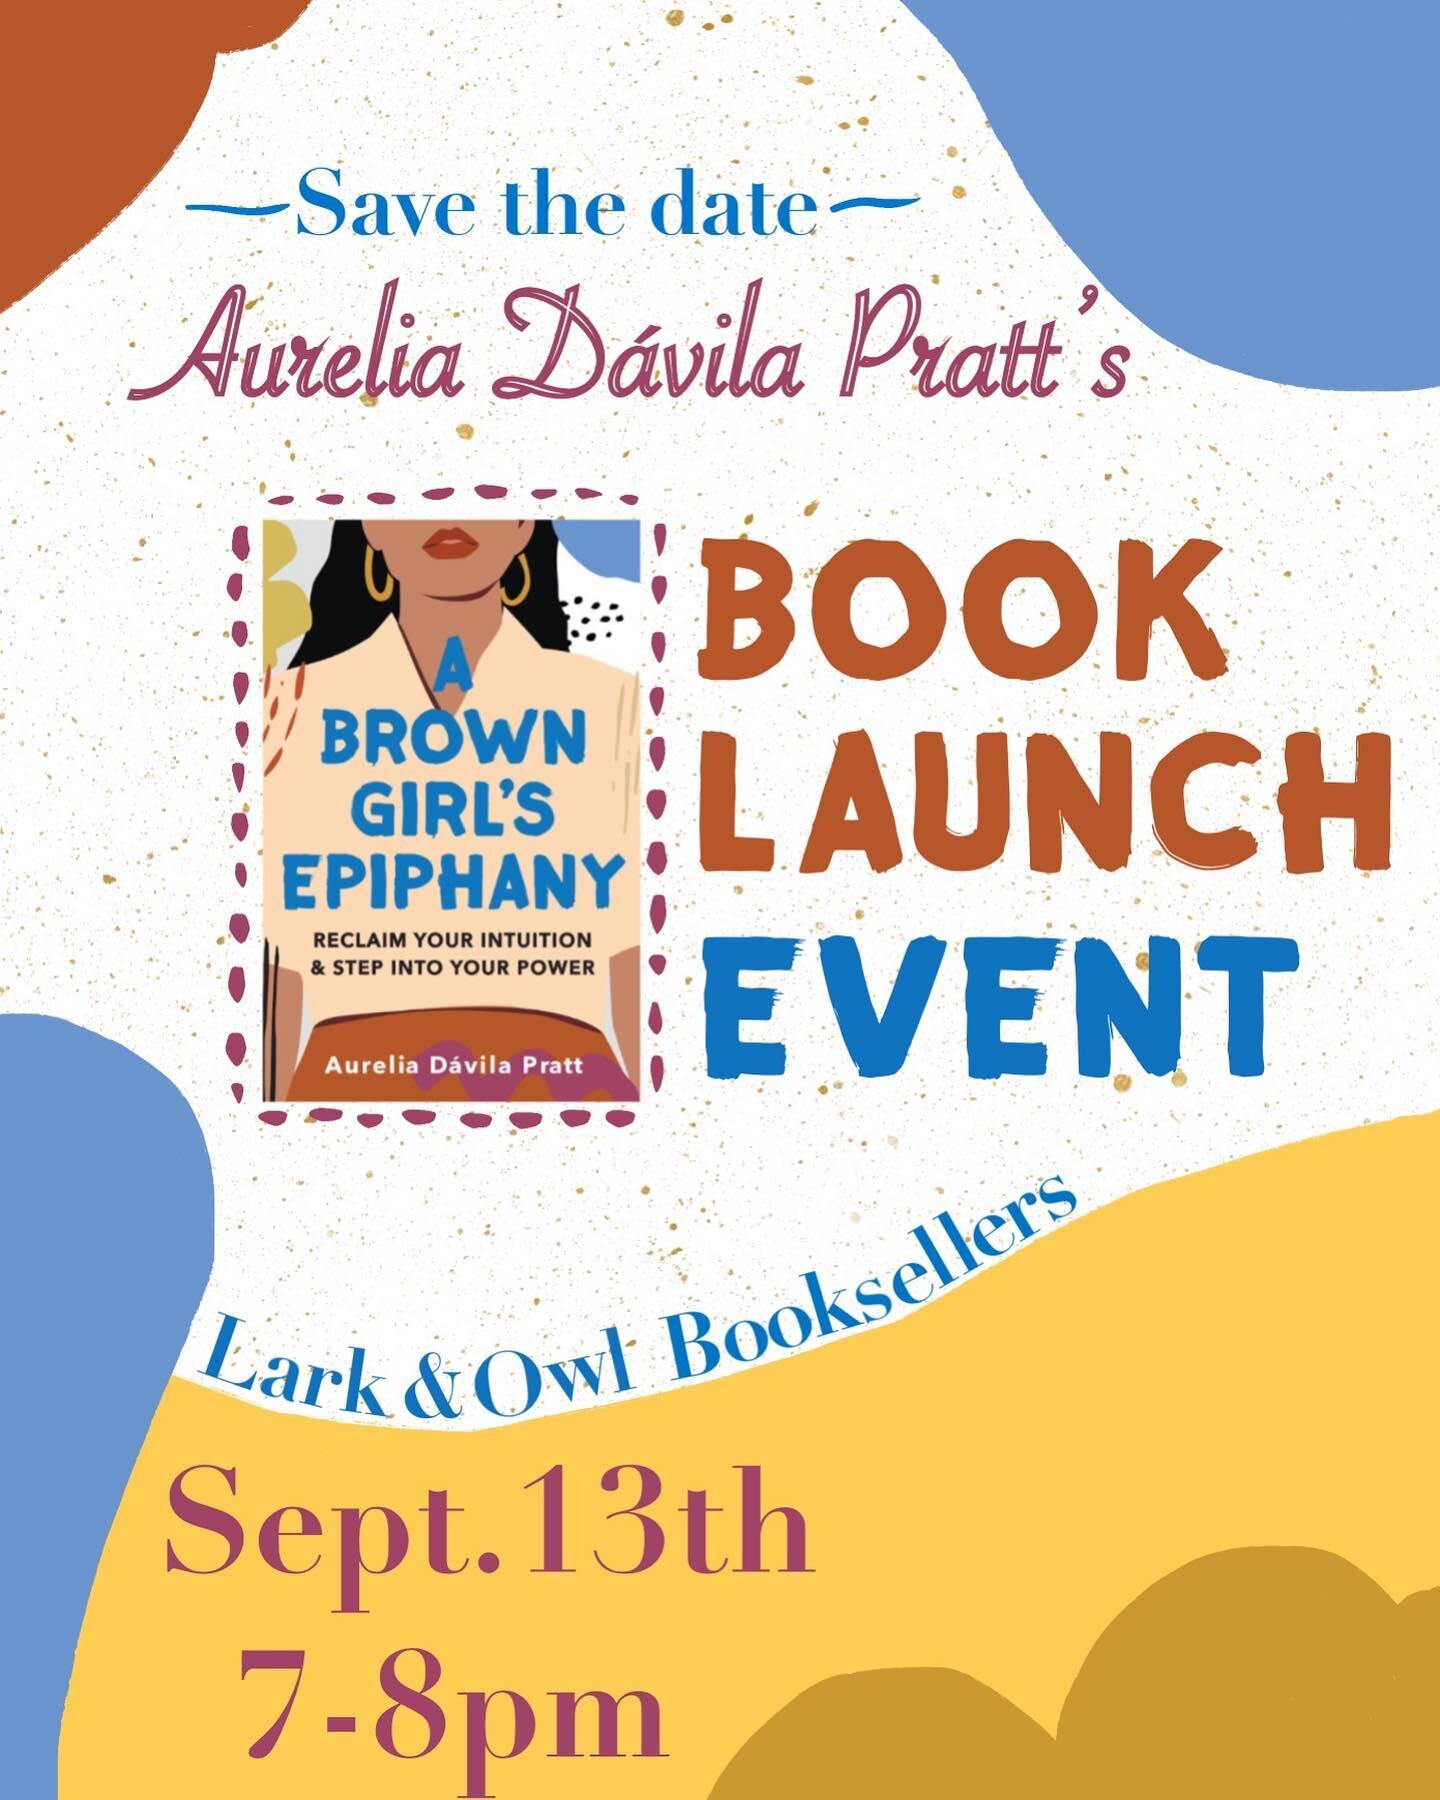 Hey y'all, the pub date for my book is two weeks from today! Hooray! (Have you ordered your copy?!) 

I'm so excited because my FAVORITE BOOK SHOP ON THE PLANET @larkandowlbooksellers is hosting a book launch event for me that night. Seriously, I hav